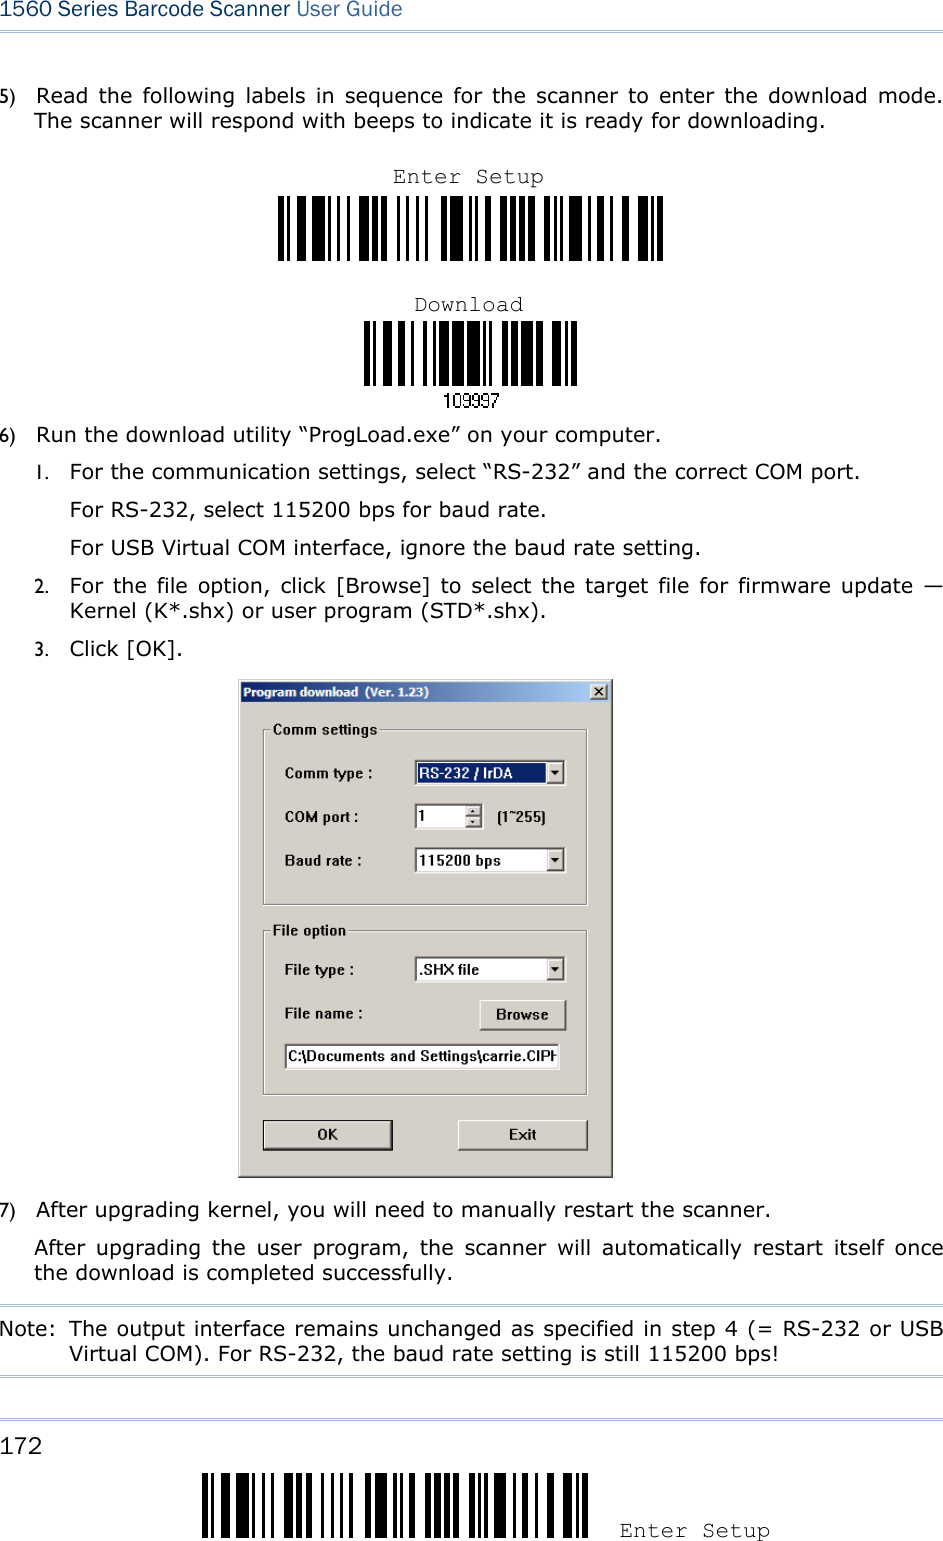 172 Enter Setup 1560 Series Barcode Scanner User Guide    5) Read the following labels in sequence for the scanner to enter the download mode. The scanner will respond with beeps to indicate it is ready for downloading.    6) Run the download utility “ProgLoad.exe” on your computer.   1. For the communication settings, select “RS-232” and the correct COM port. For RS-232, select 115200 bps for baud rate. For USB Virtual COM interface, ignore the baud rate setting.   2. For the file option, click [Browse] to select the target file for firmware update — Kernel (K*.shx) or user program (STD*.shx). 3. Click [OK].  7) After upgrading kernel, you will need to manually restart the scanner.           After upgrading the user program, the scanner will automatically restart itself once the download is completed successfully.   Note:  The output interface remains unchanged as specified in step 4 (= RS-232 or USB Virtual COM). For RS-232, the baud rate setting is still 115200 bps!  Enter SetupDownload